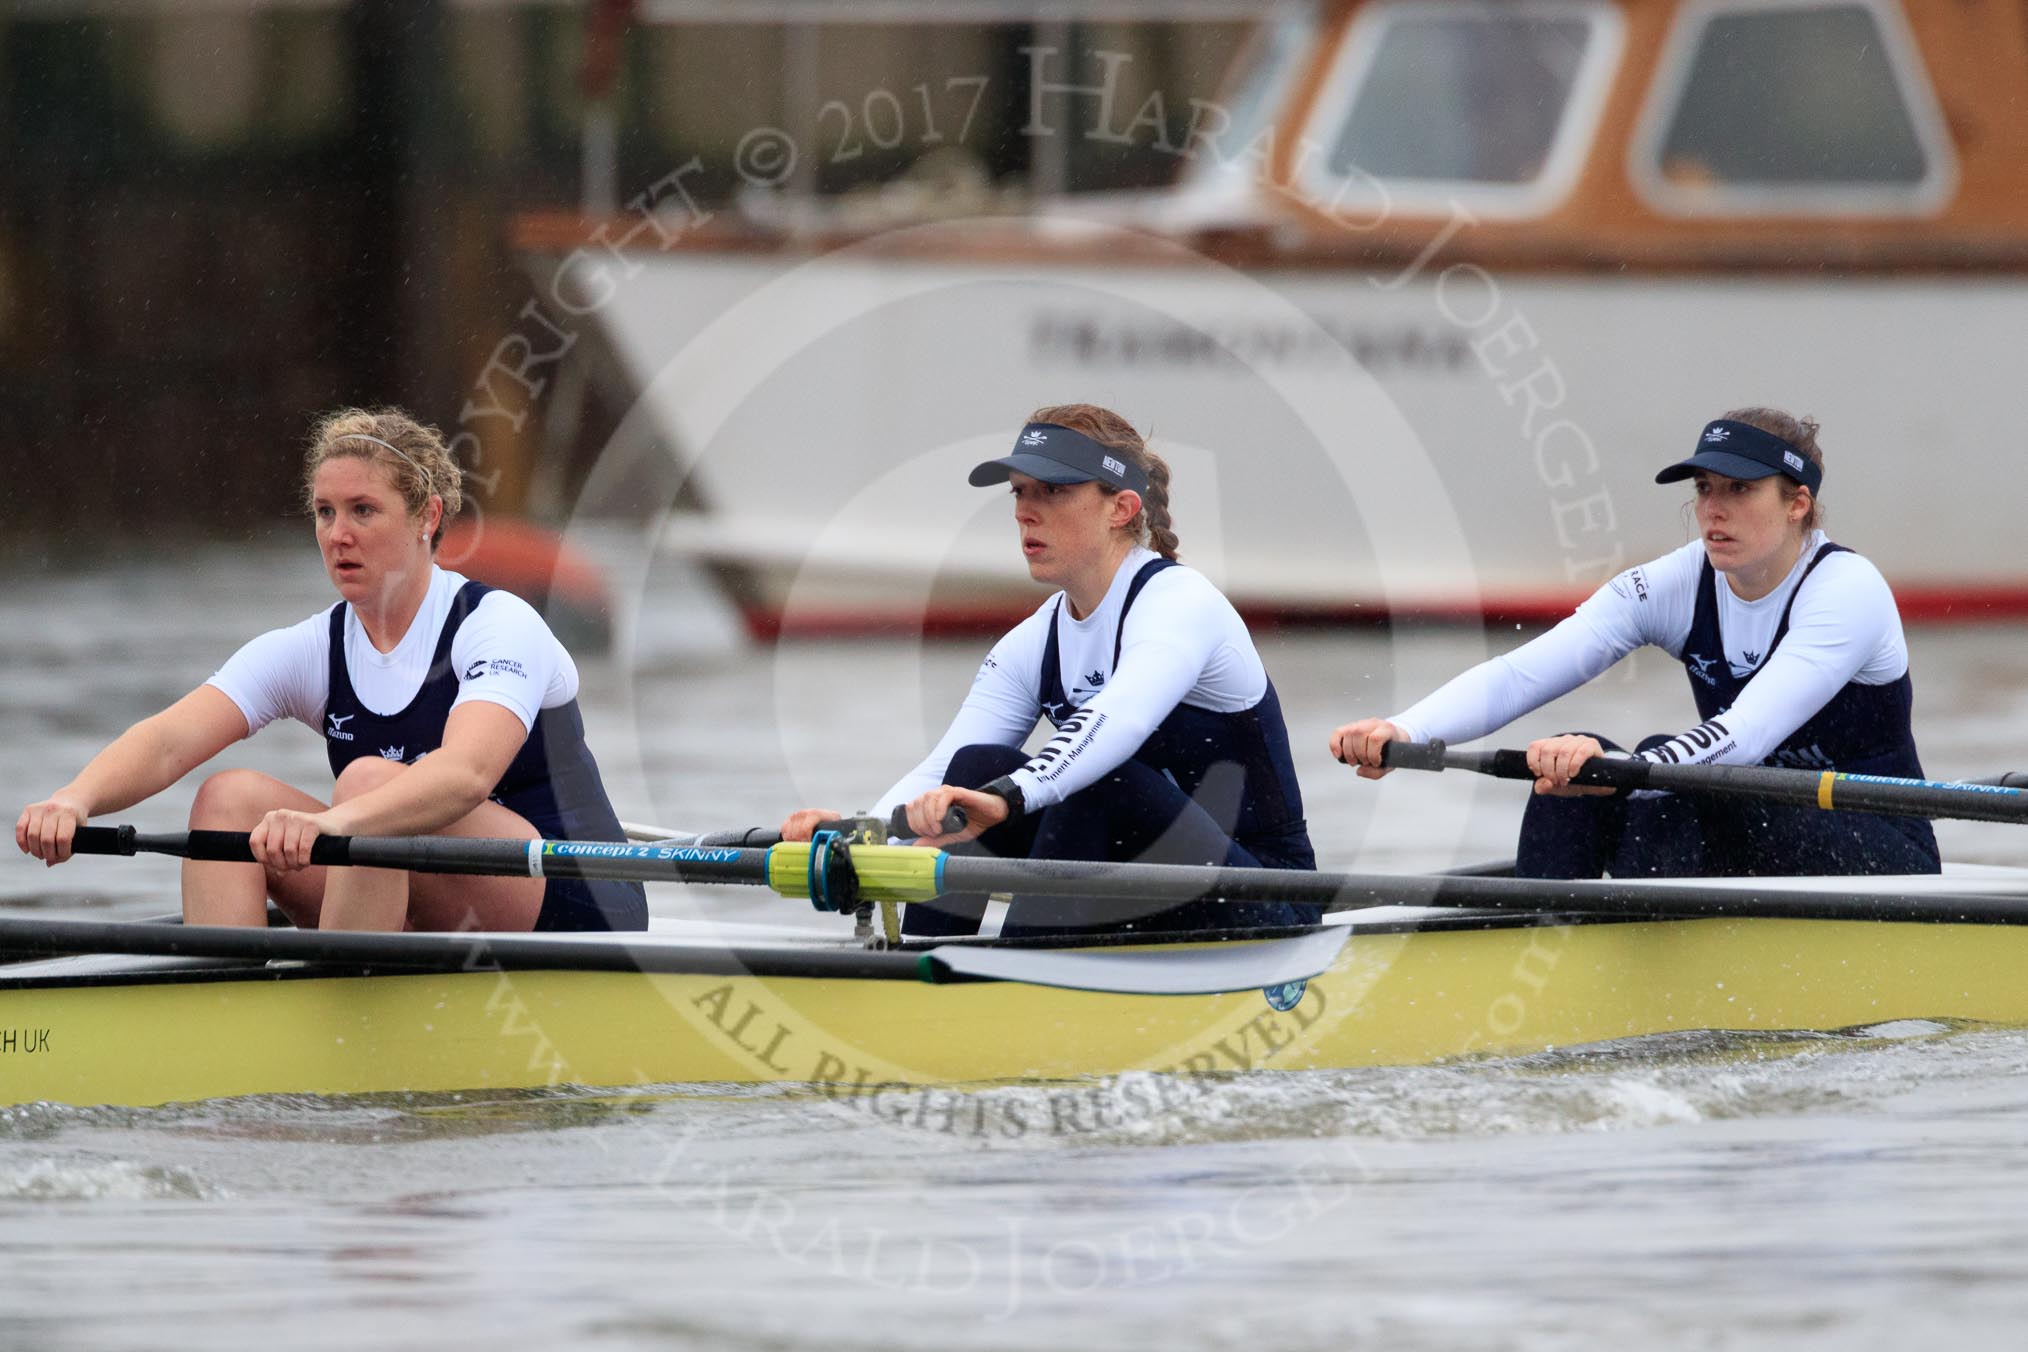 The Boat Race season 2018 - Women's Boat Race Trial Eights (OUWBC, Oxford): "Coursing River" seconds after the race has been started - 5 Morgan McGovern, 4 Anna Murgatroyd, 3 Stefanie Zekoll.
River Thames between Putney Bridge and Mortlake,
London SW15,

United Kingdom,
on 21 January 2018 at 14:27, image #54